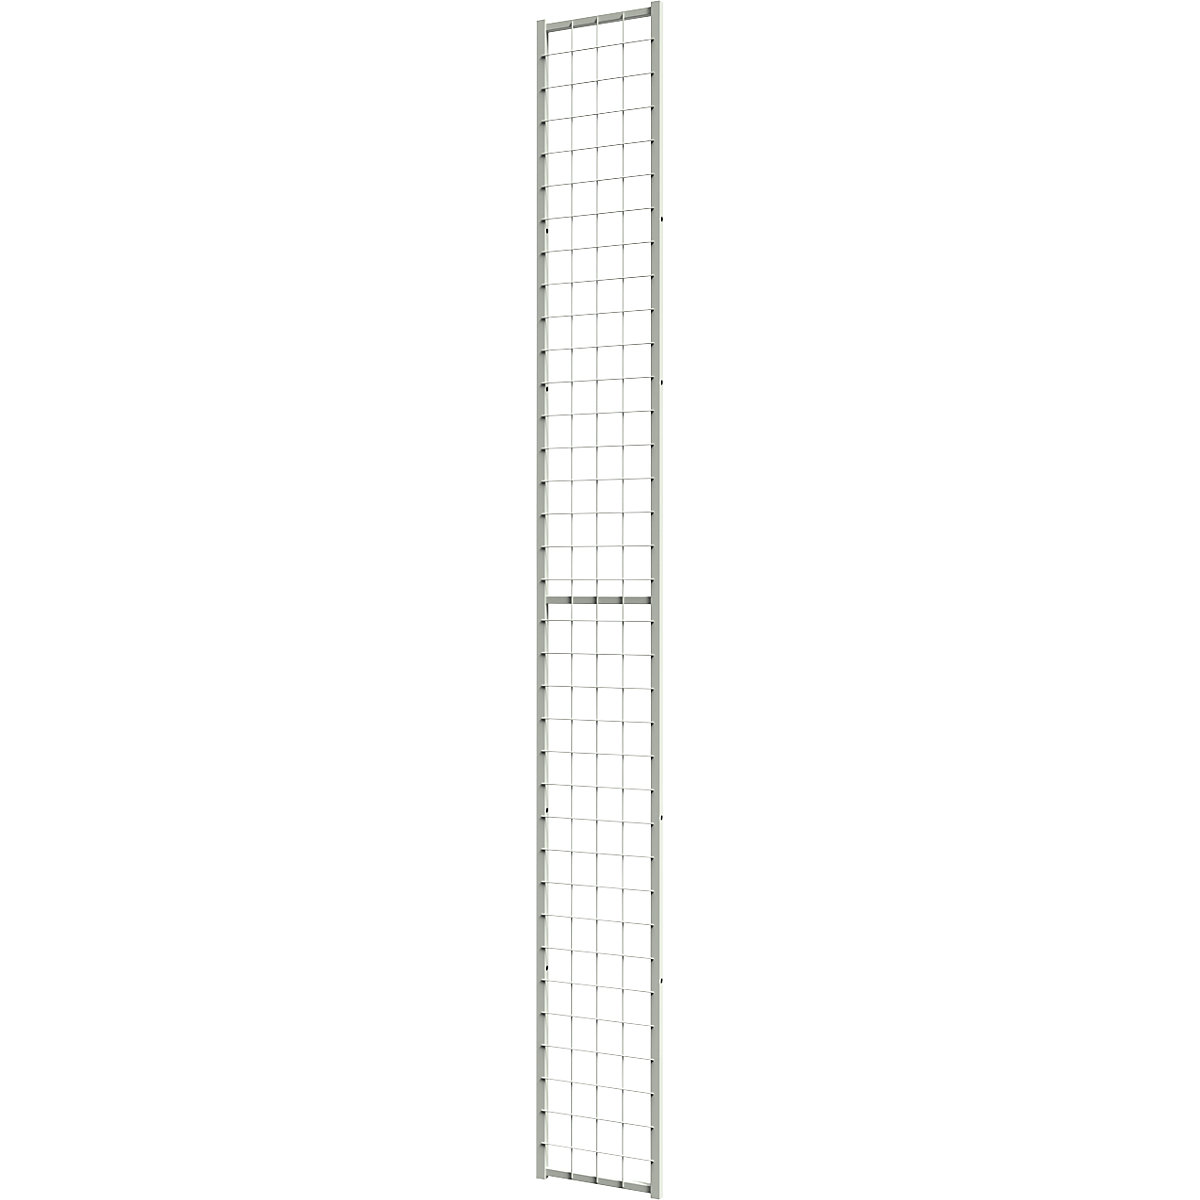 X-STORE 2.0 partition system, wall section – Axelent